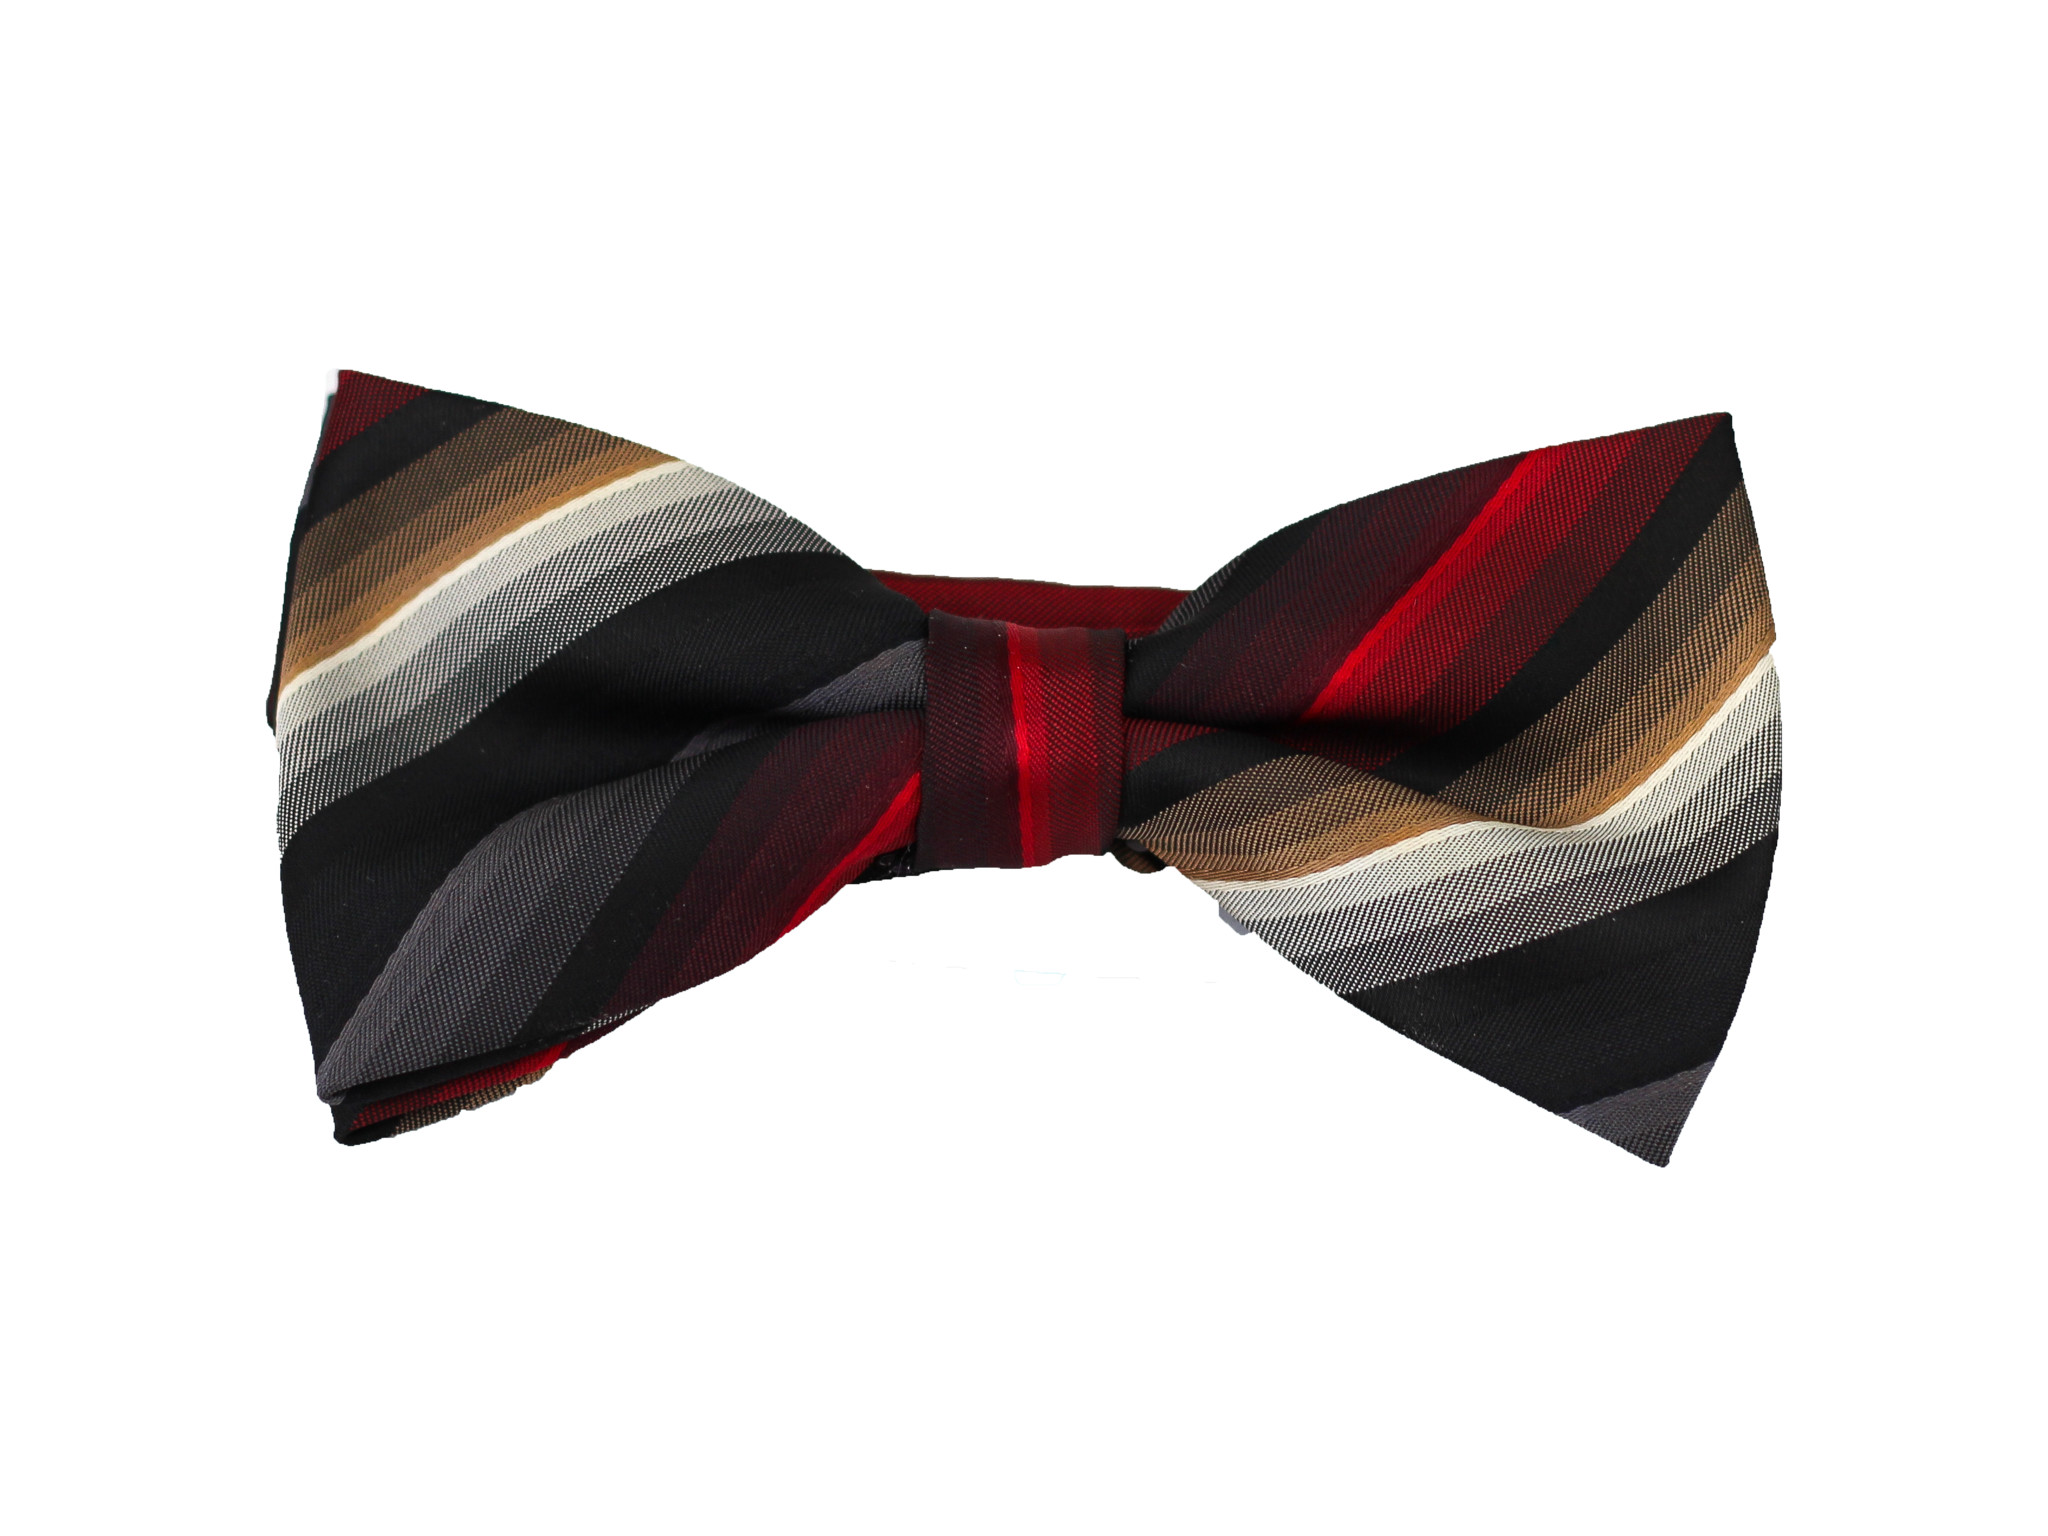 2048x1536 Red Black and Gray Striped Bow Tie